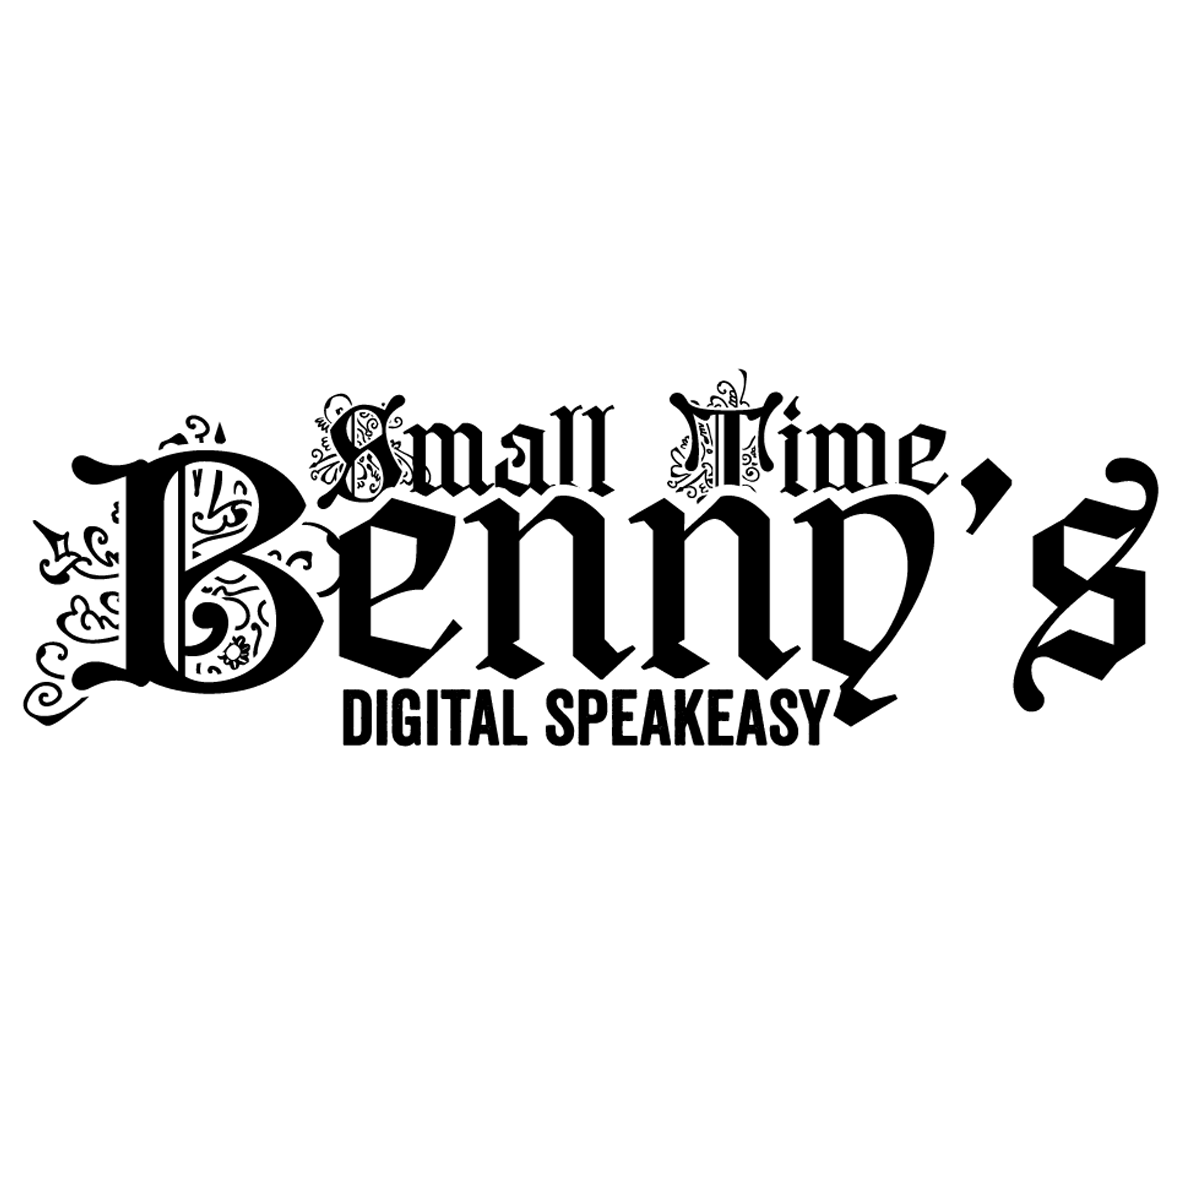 A logo comprised of stylized writing saying 'Small Time Benny's Digital Speakeasy'.